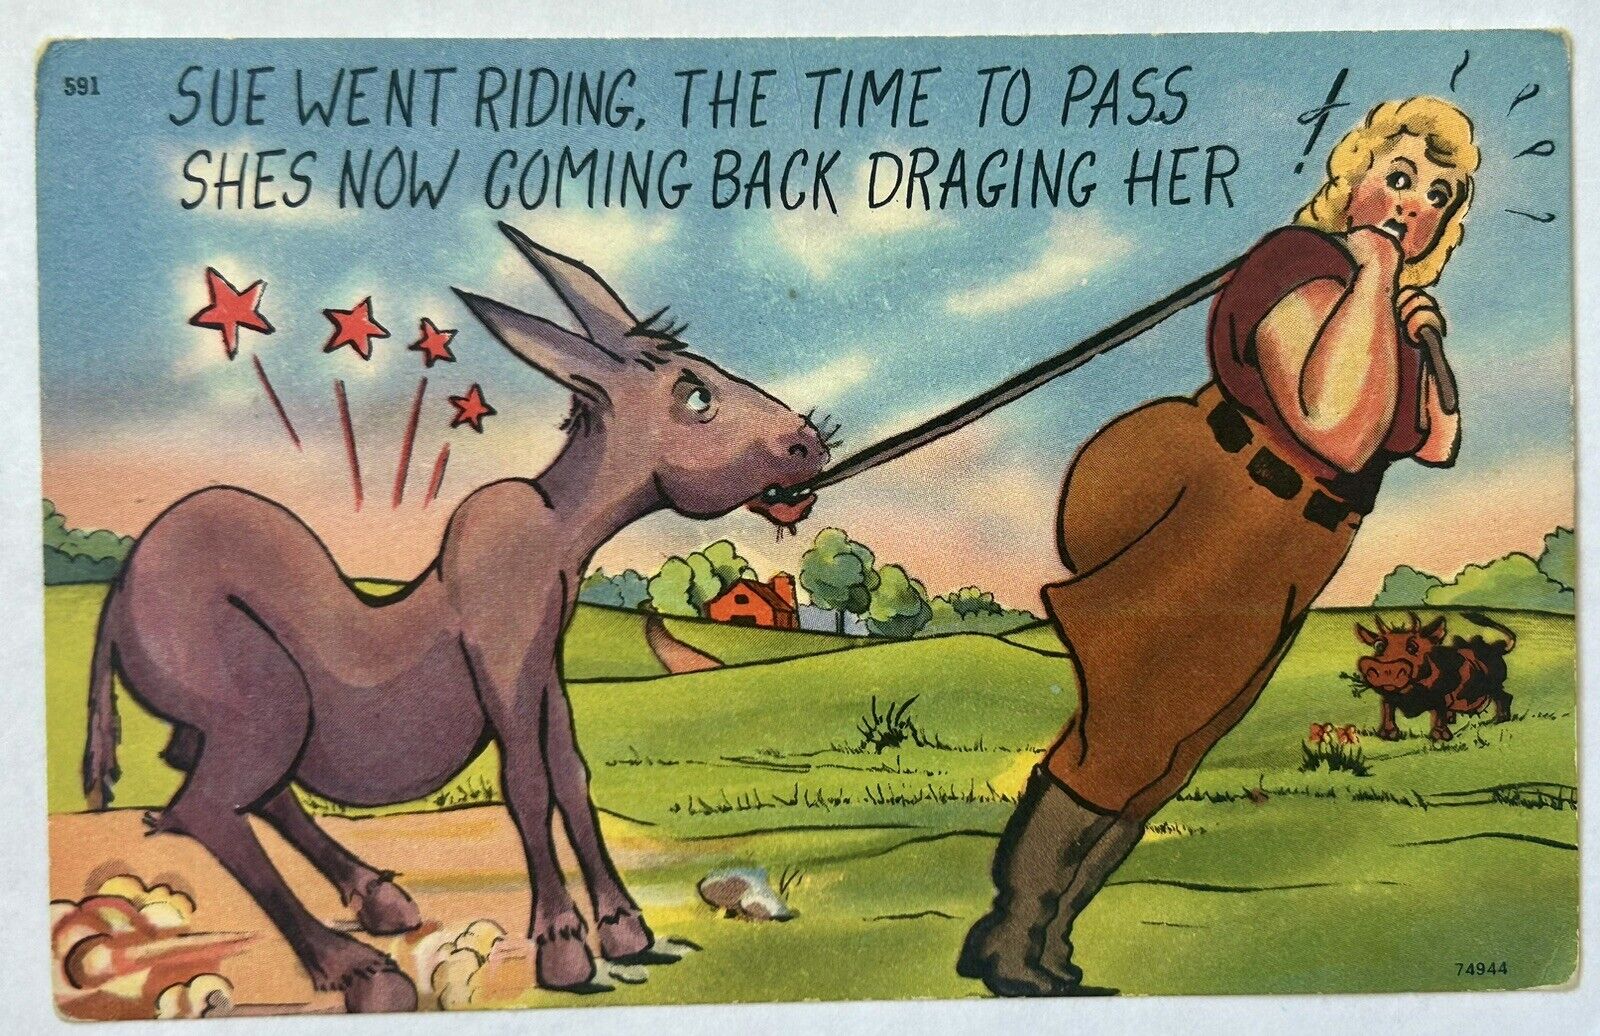 Woman Injures Mule From Riding It. Funny Vintage Postcard